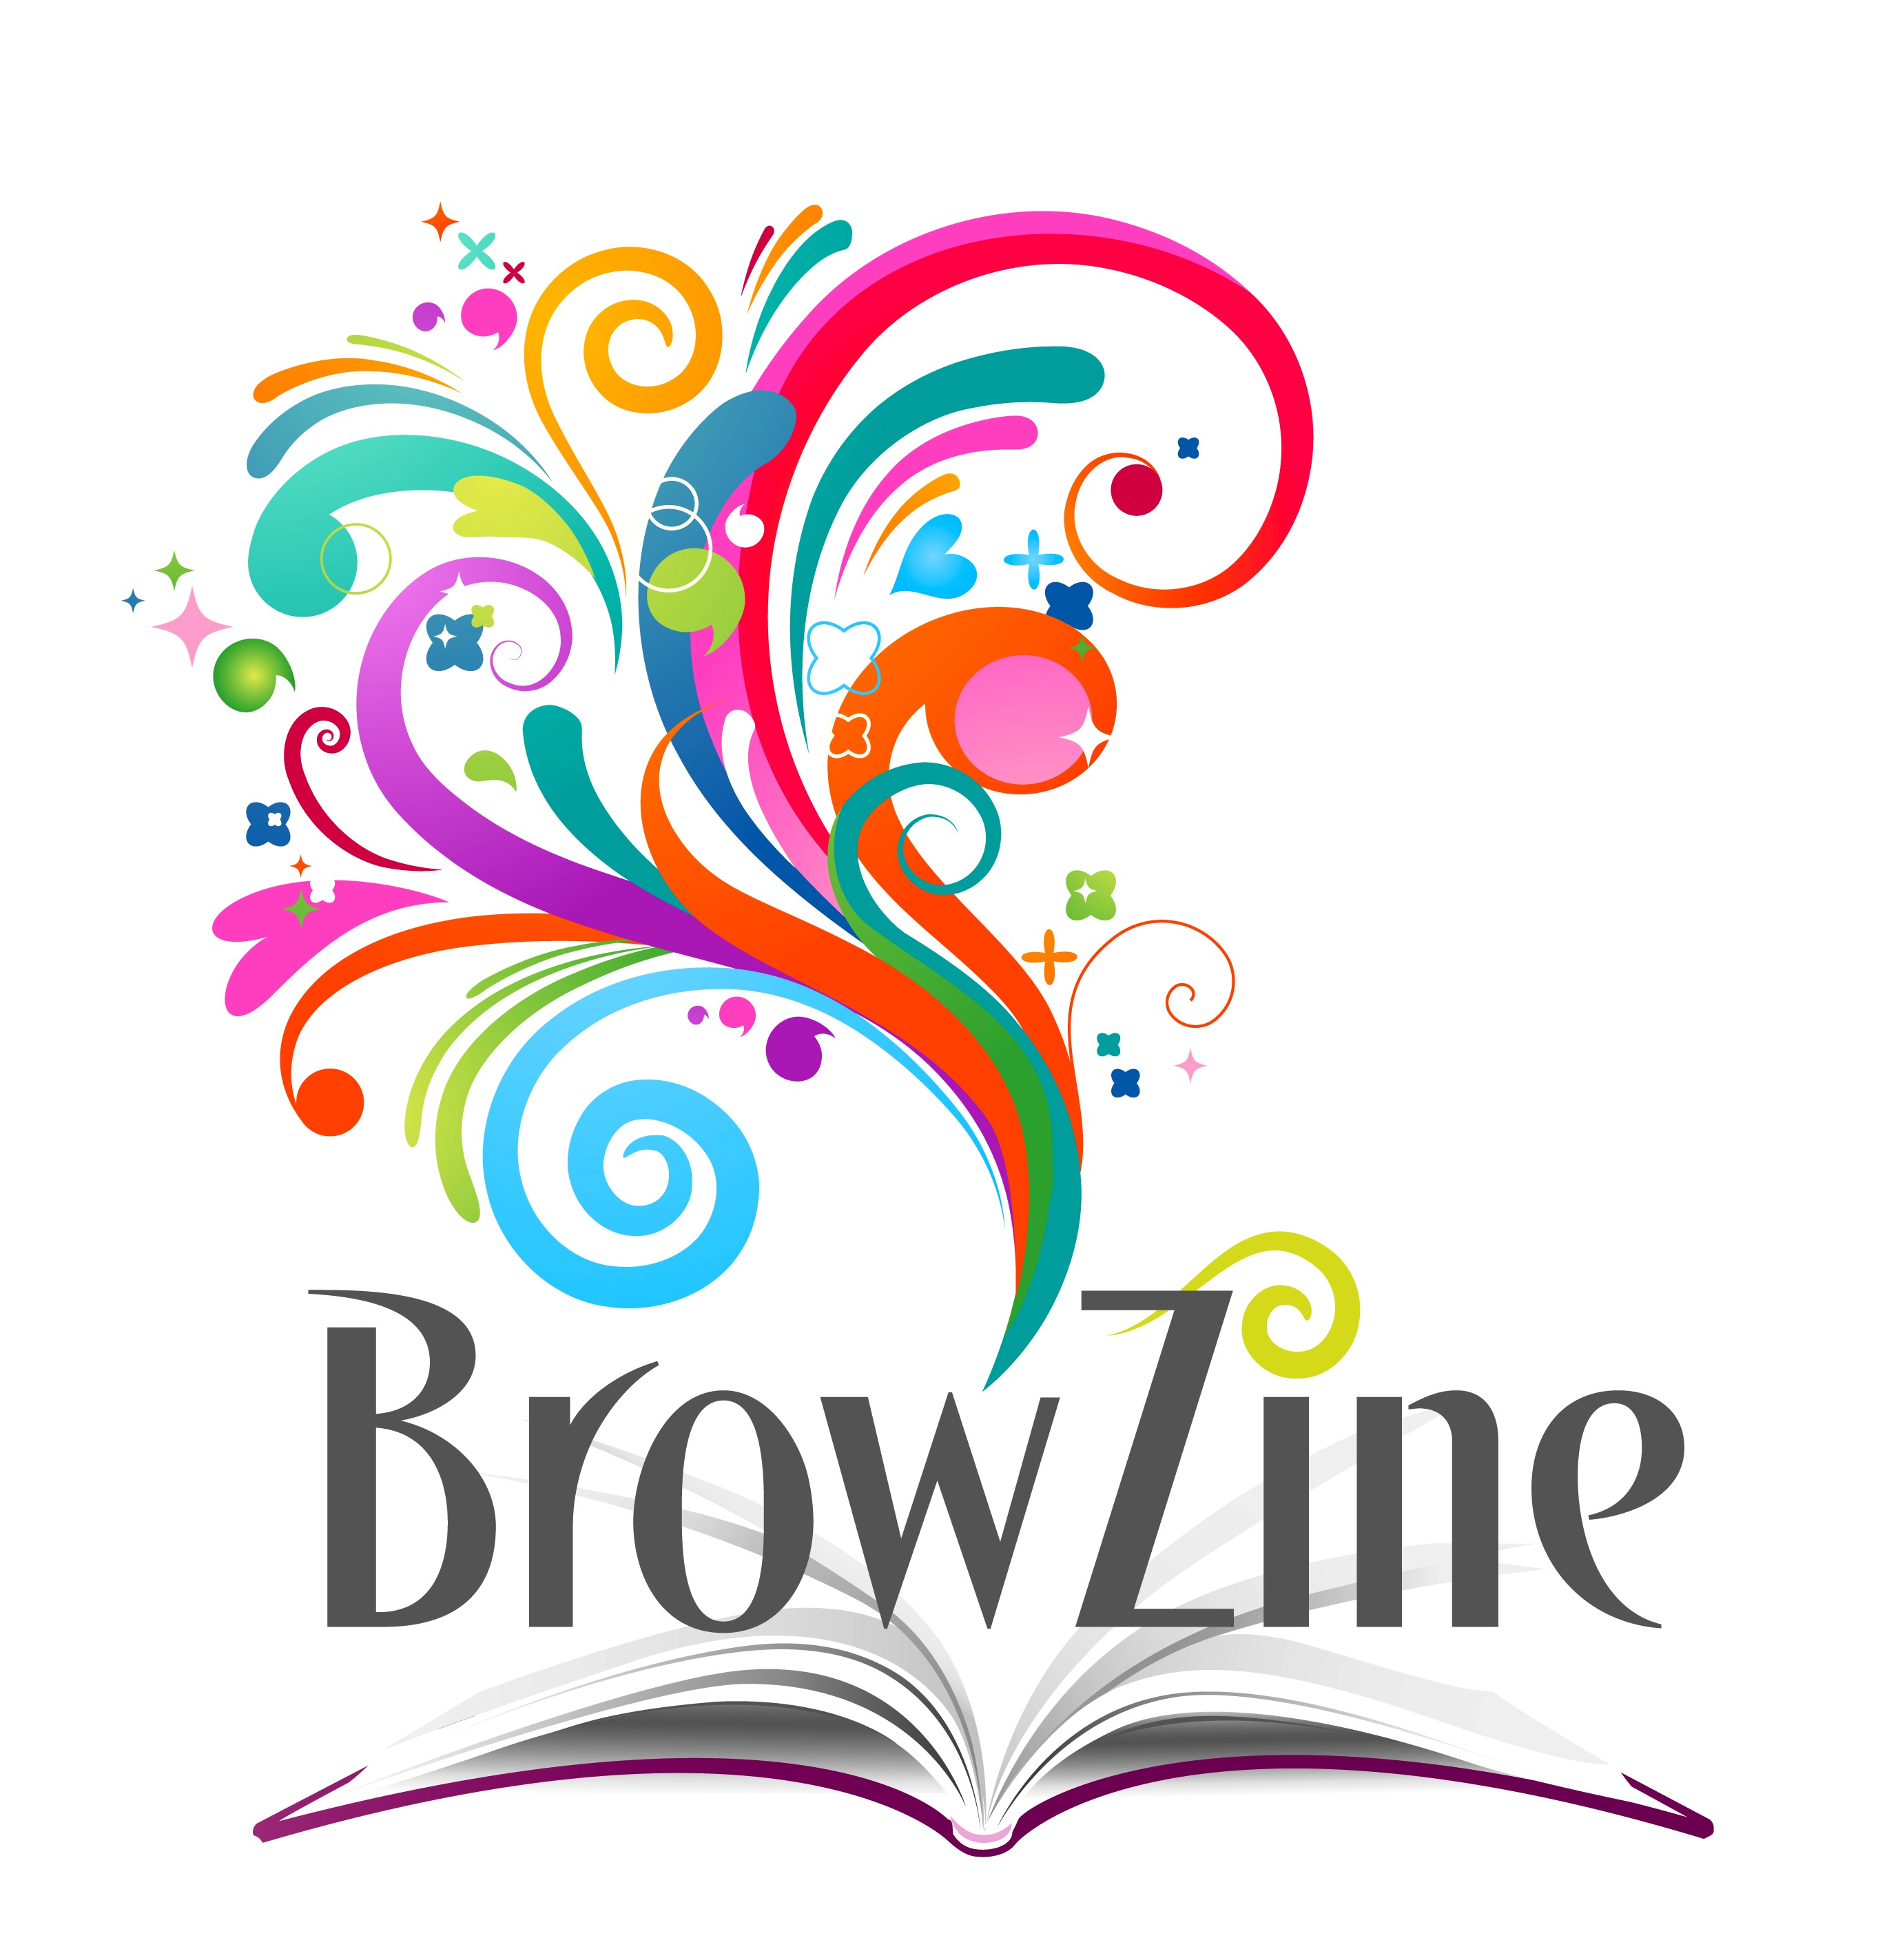 BrowZine expands in 2015 with planned enhancements